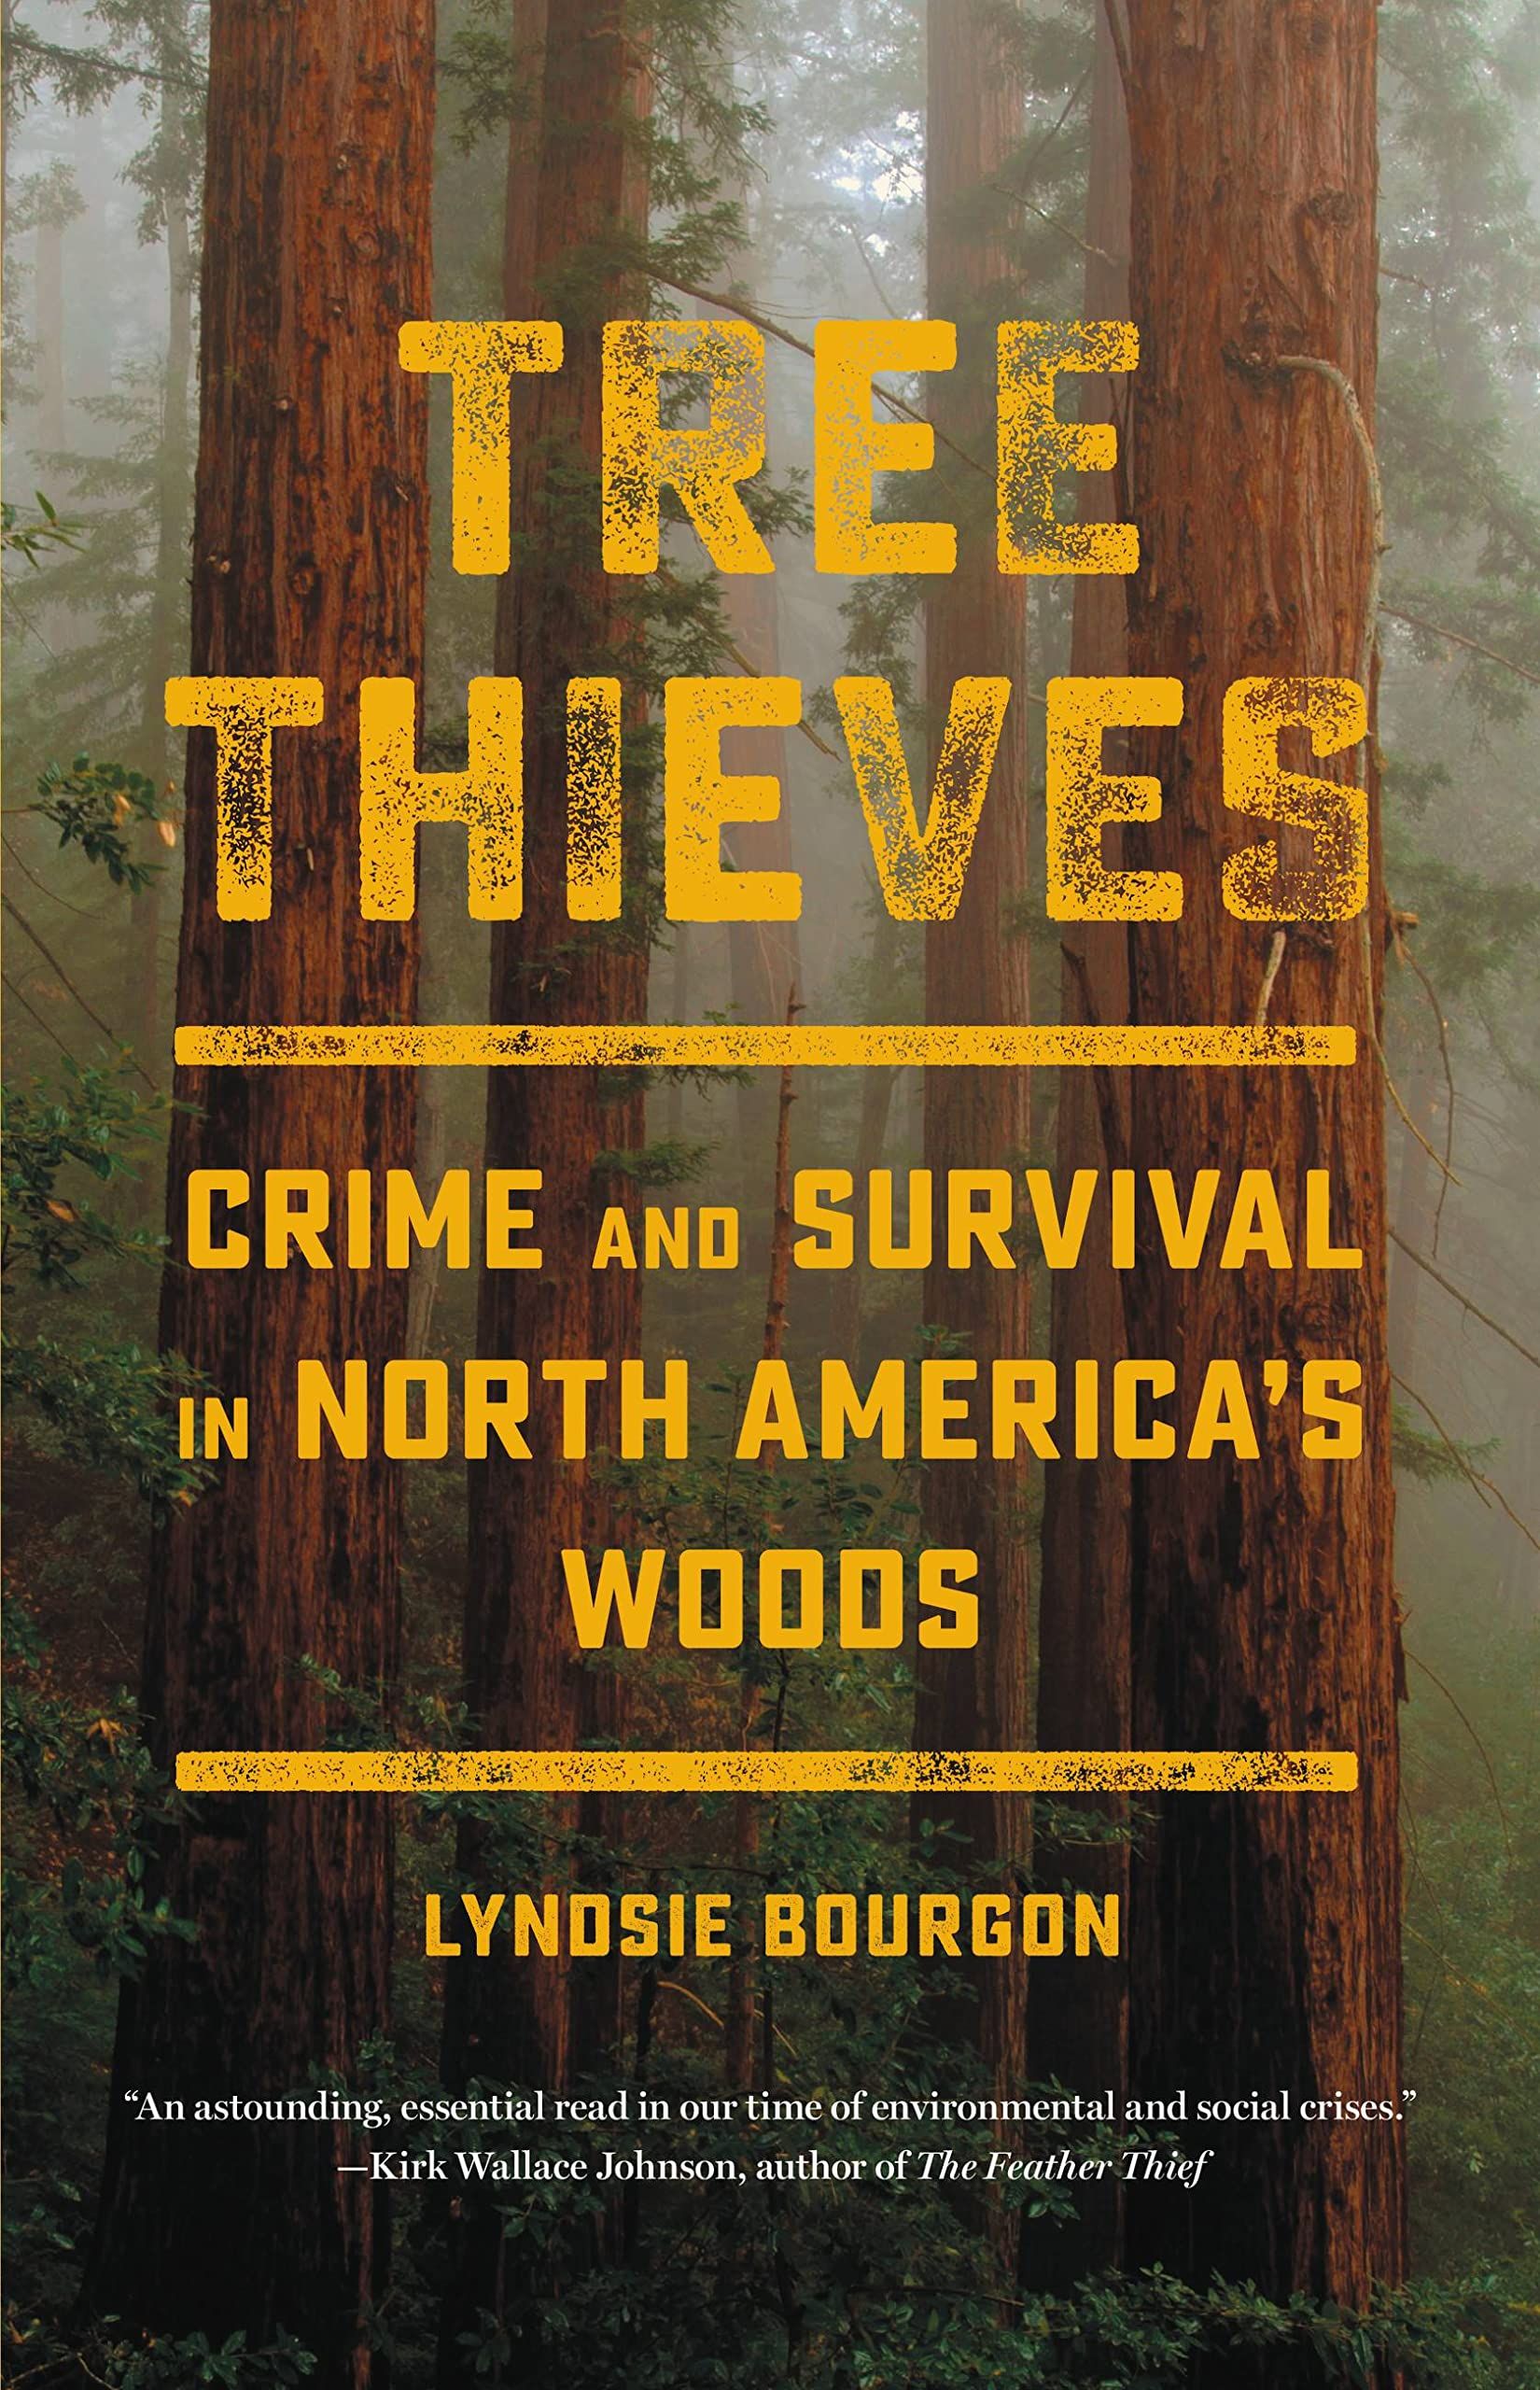 Tree Thieves: Crime and Survival in North America's Woods'un kapağı 